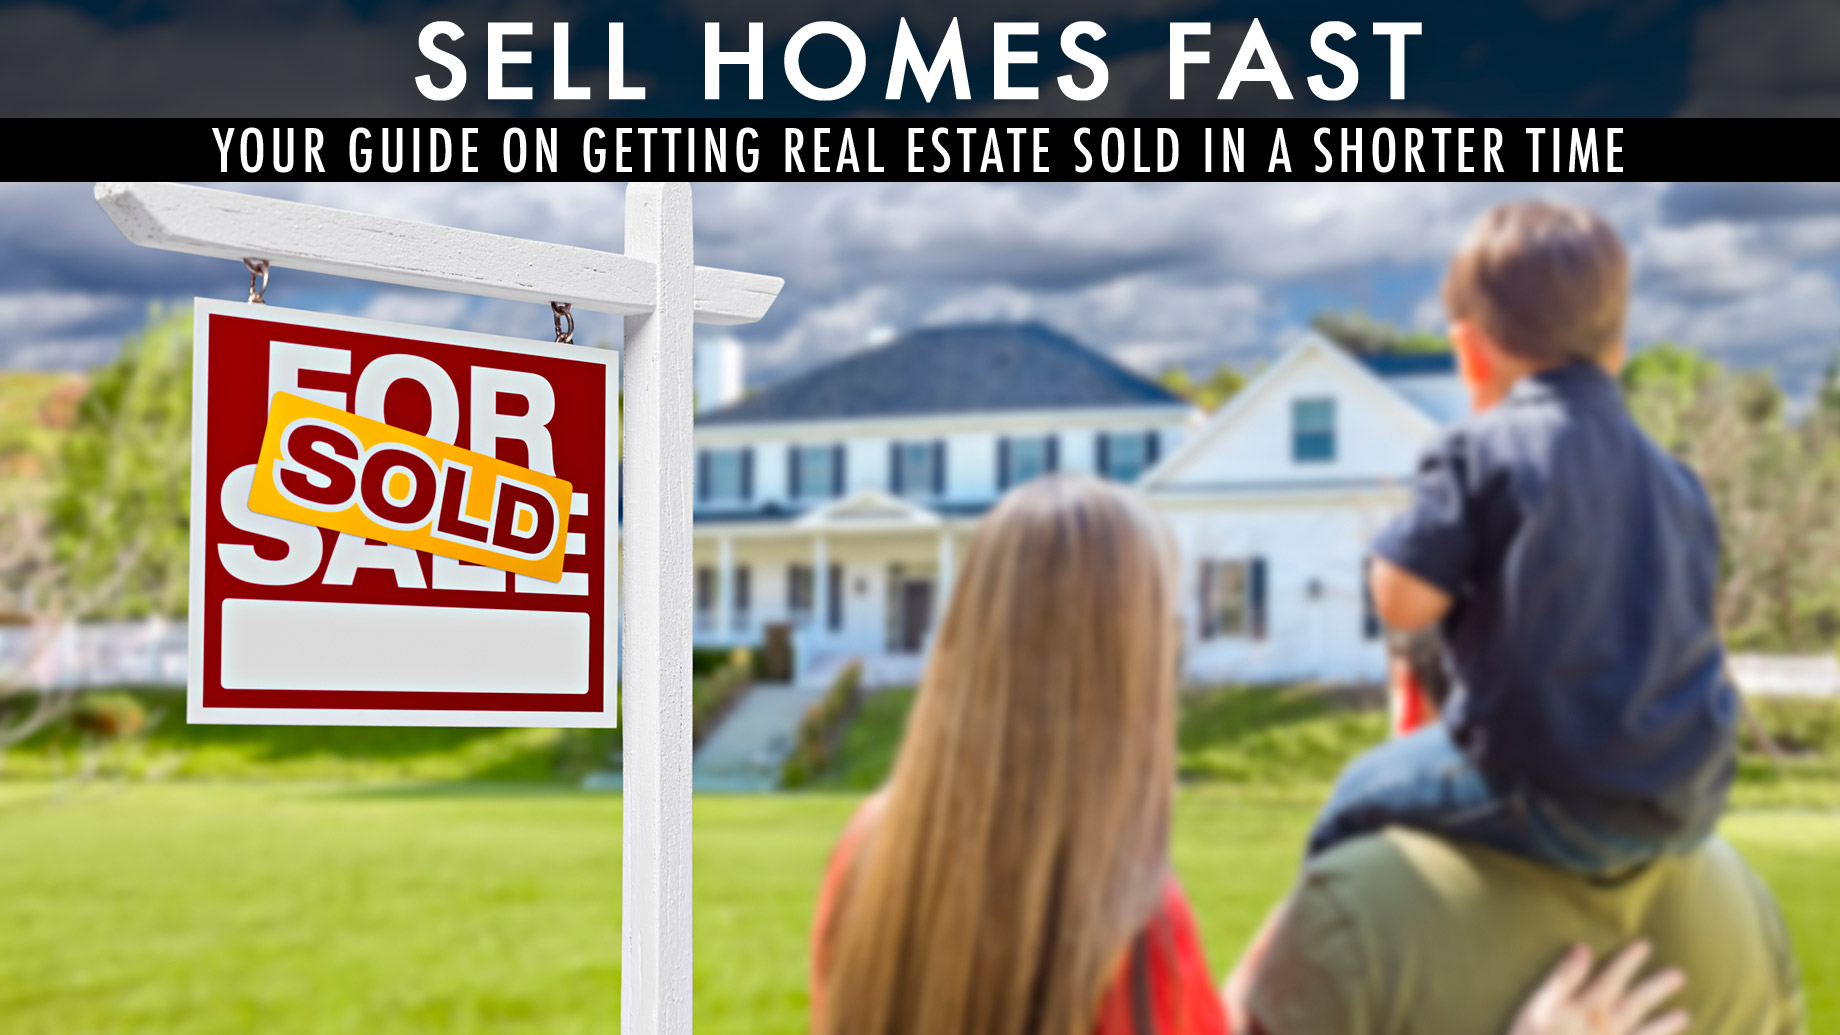 Sell Homes Fast - Your Guide on Getting Real Estate Sold in a Shorter Time